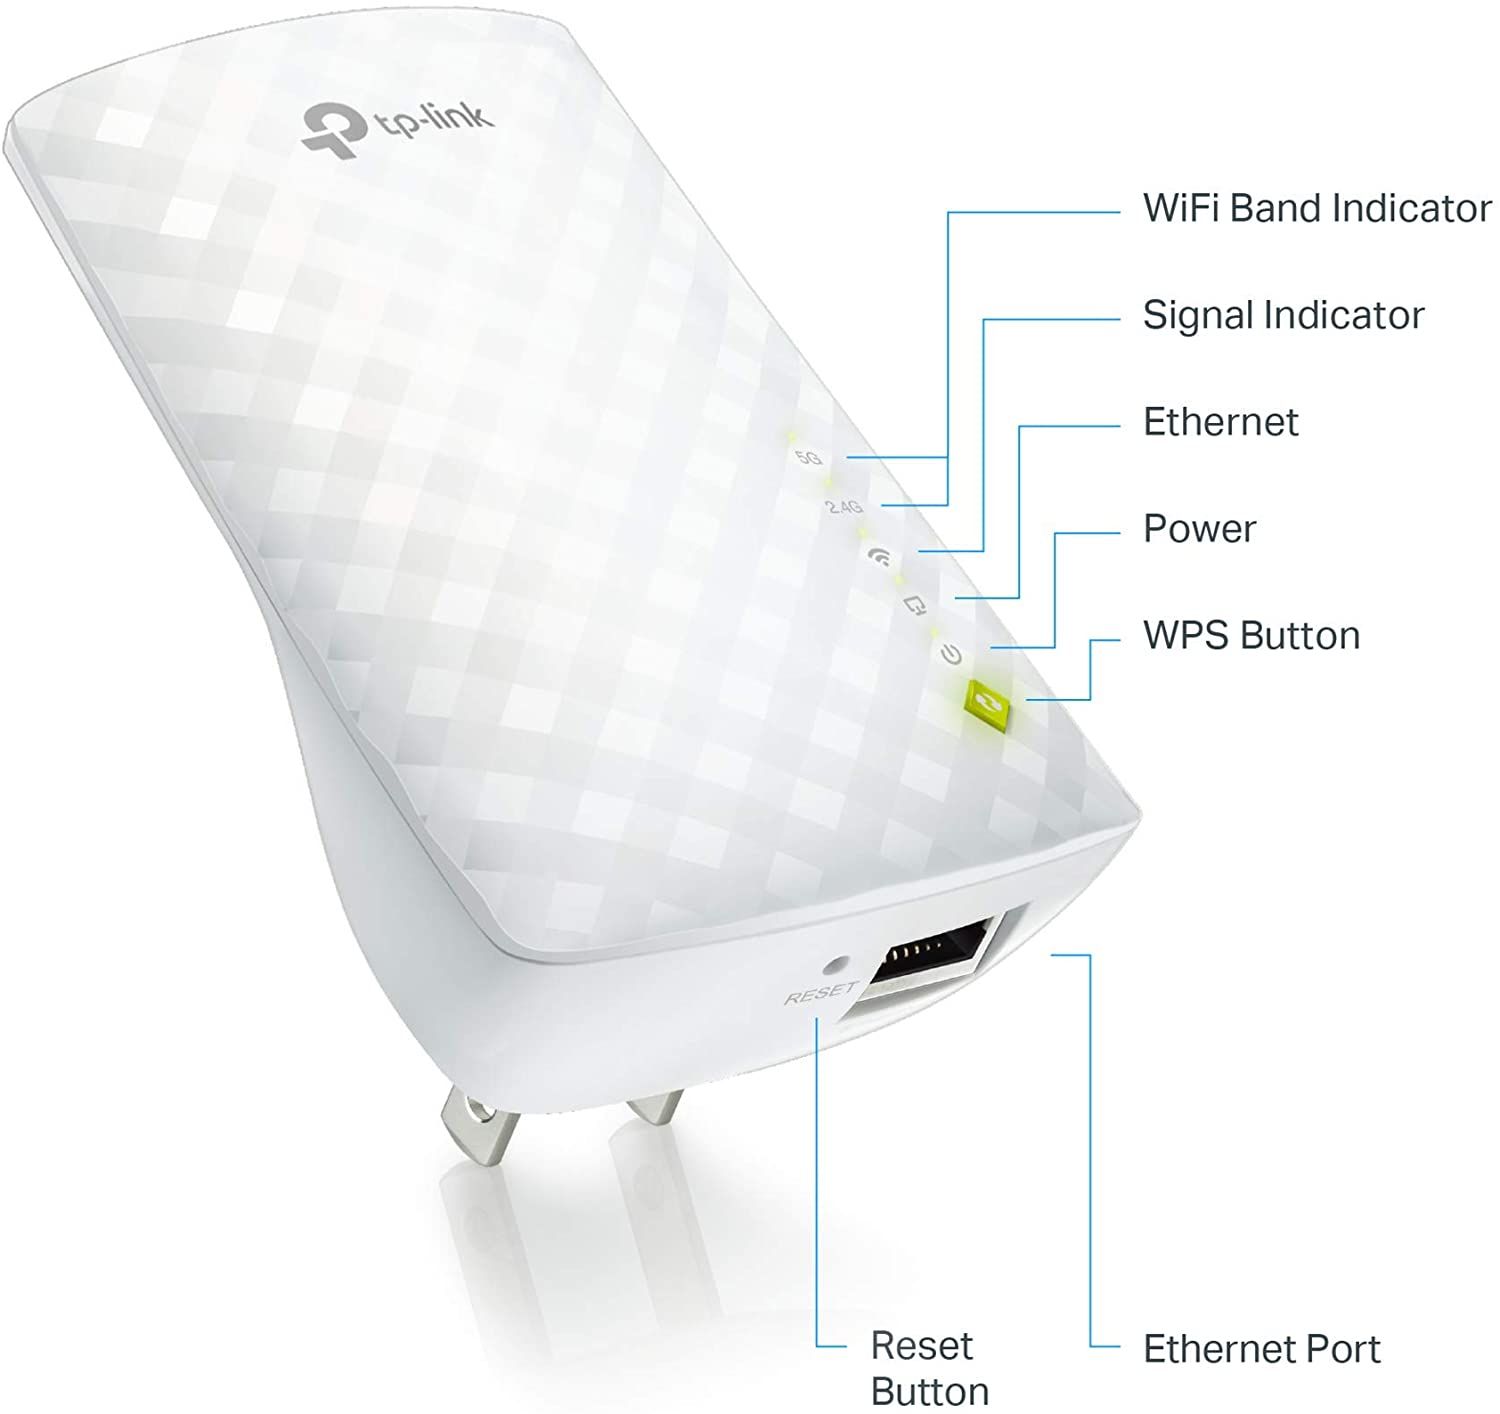 TP-Link AC750 WiFi Extender (RE220) features